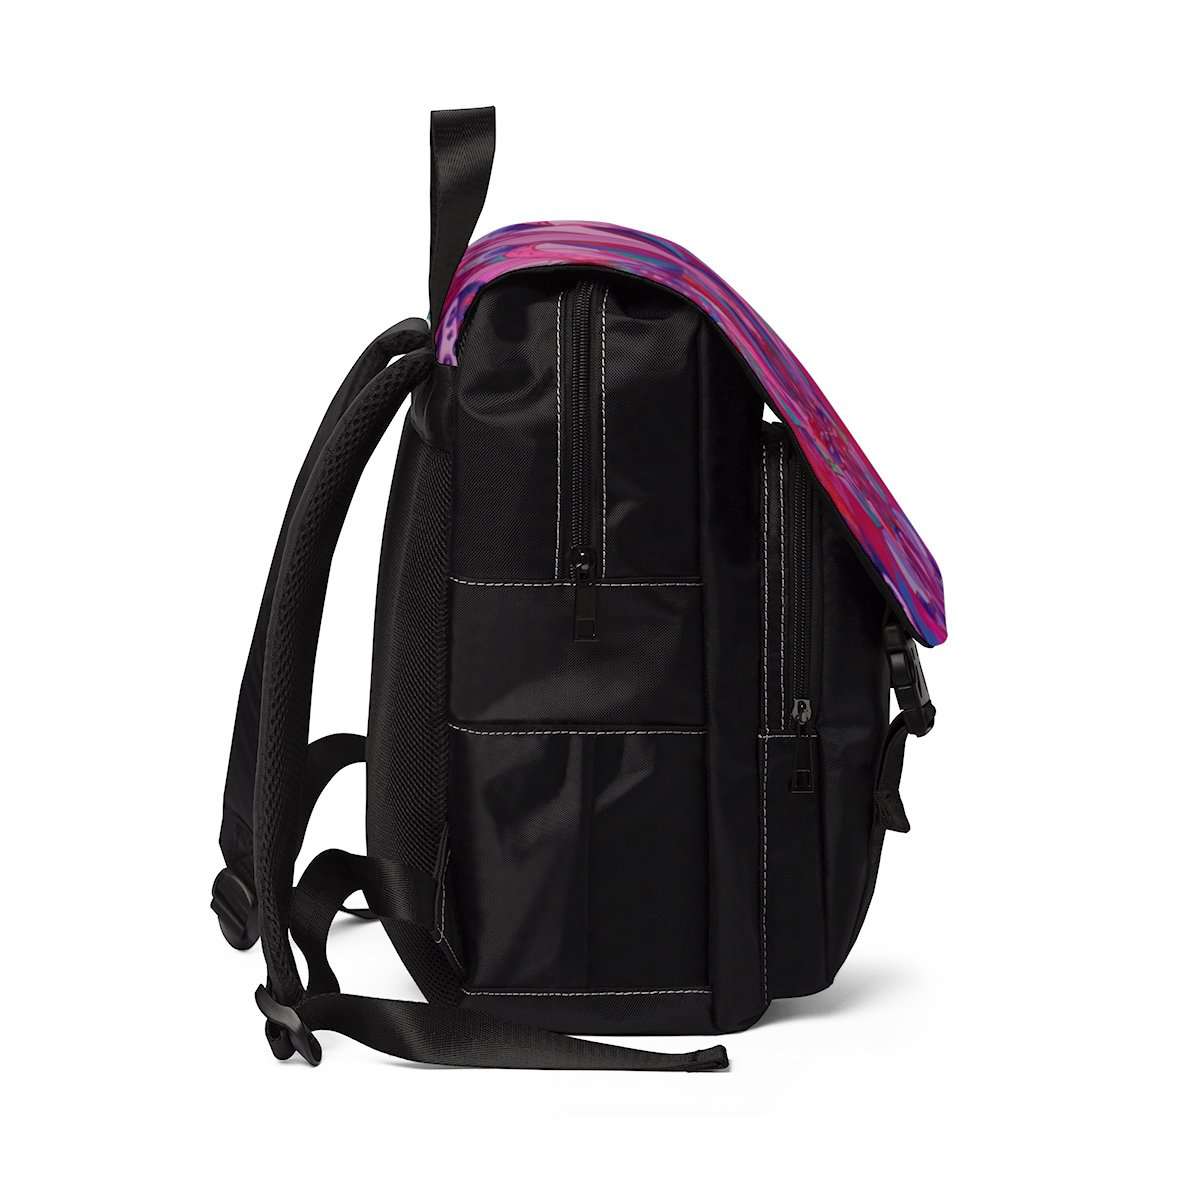 Human Intimacy - Unisex Casual Shoulder Backpack